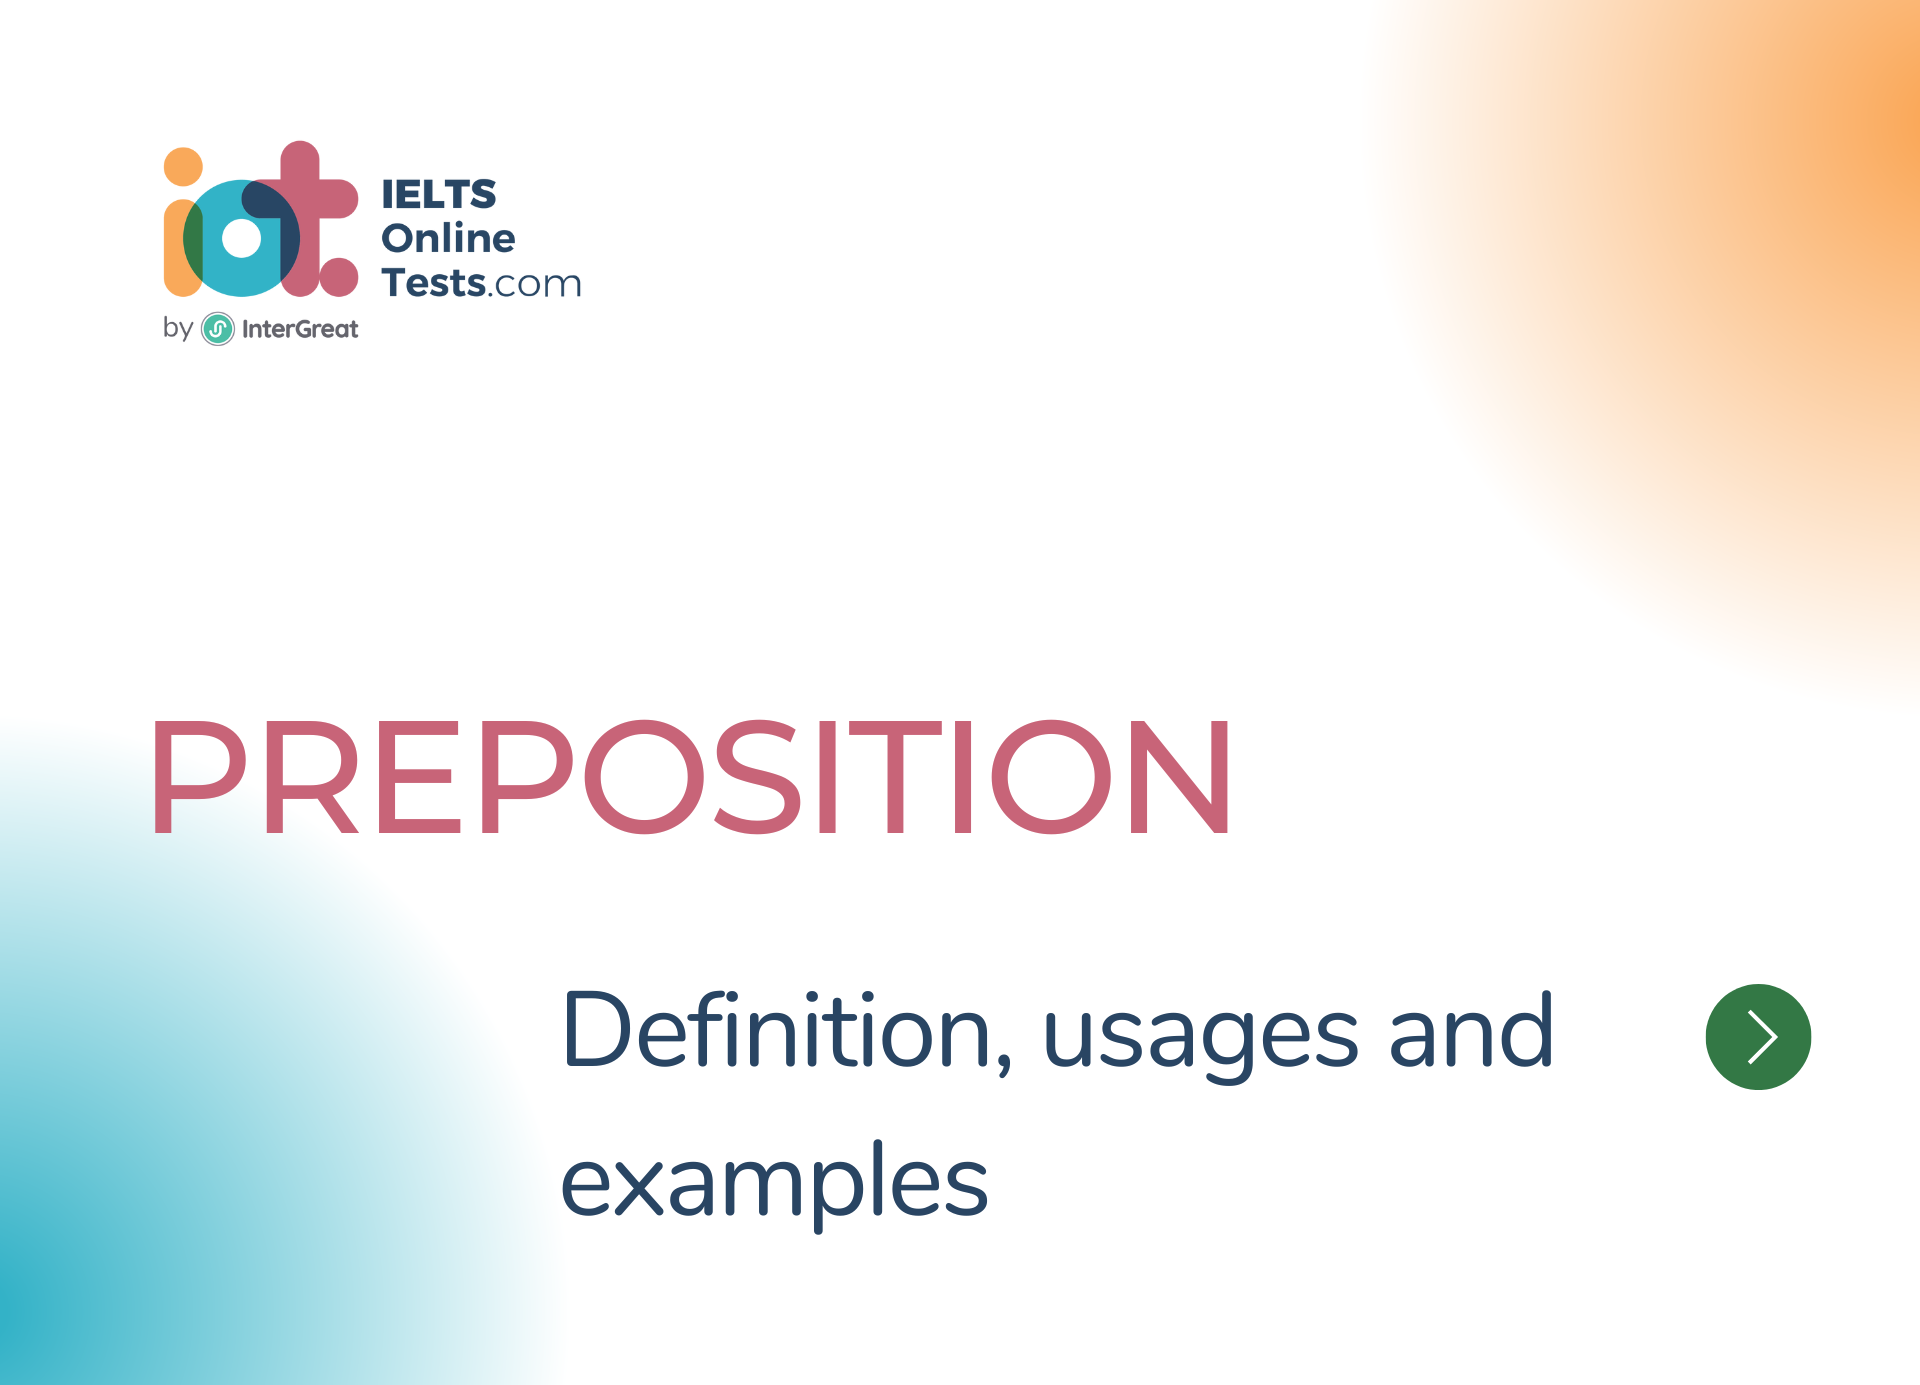 Preposition definition, usages and examples